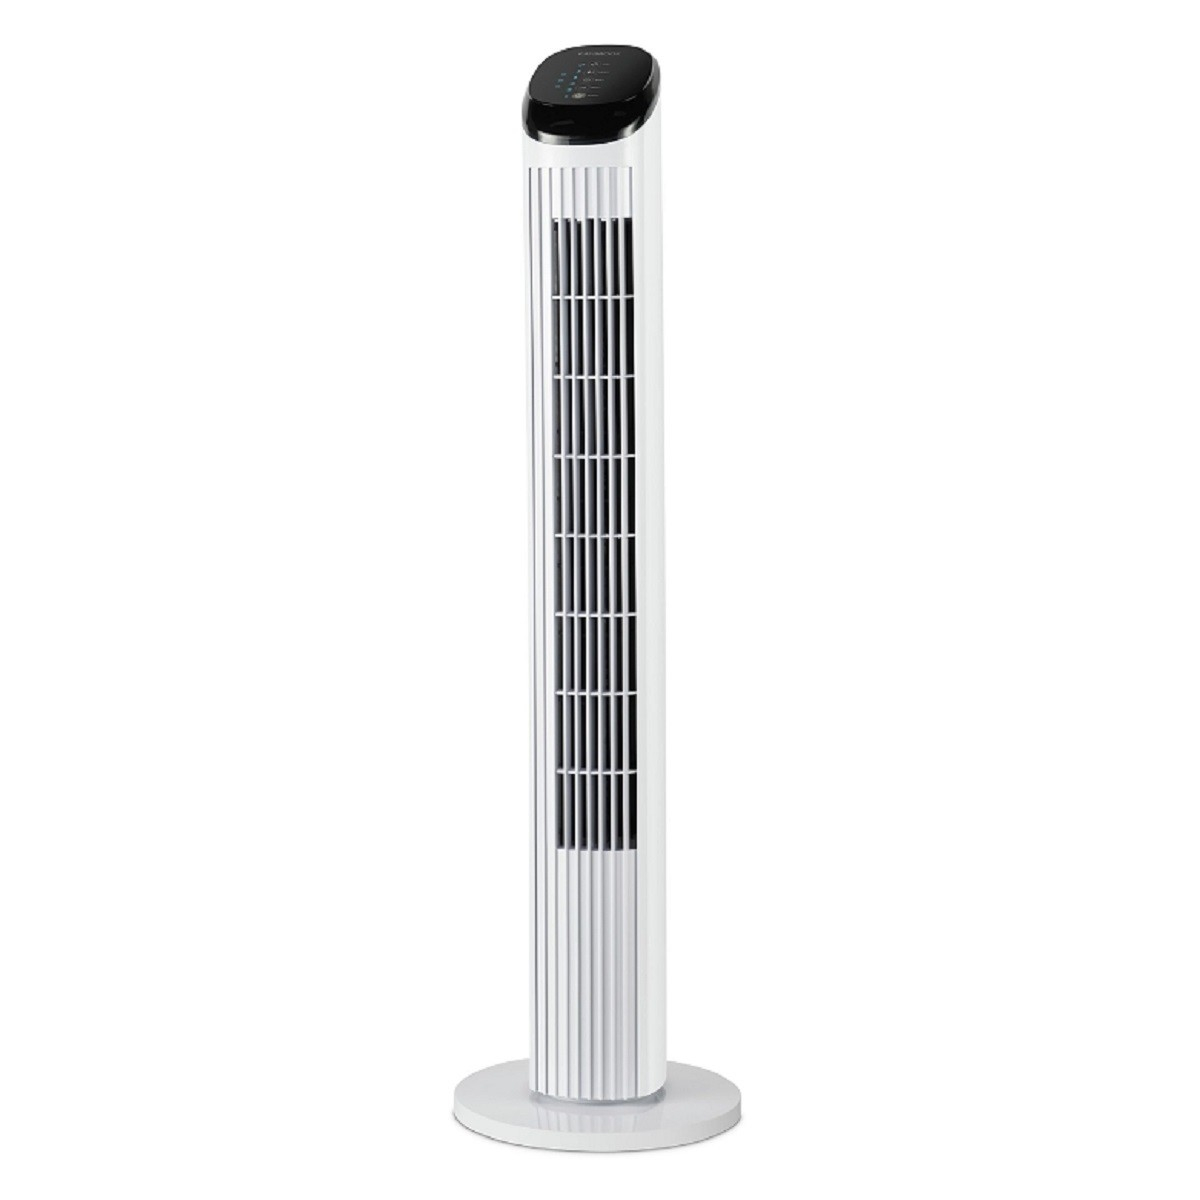 Kambrook 87cm Tower Fan Touch Display White Ktf840wht in dimensions 1200 X 1200